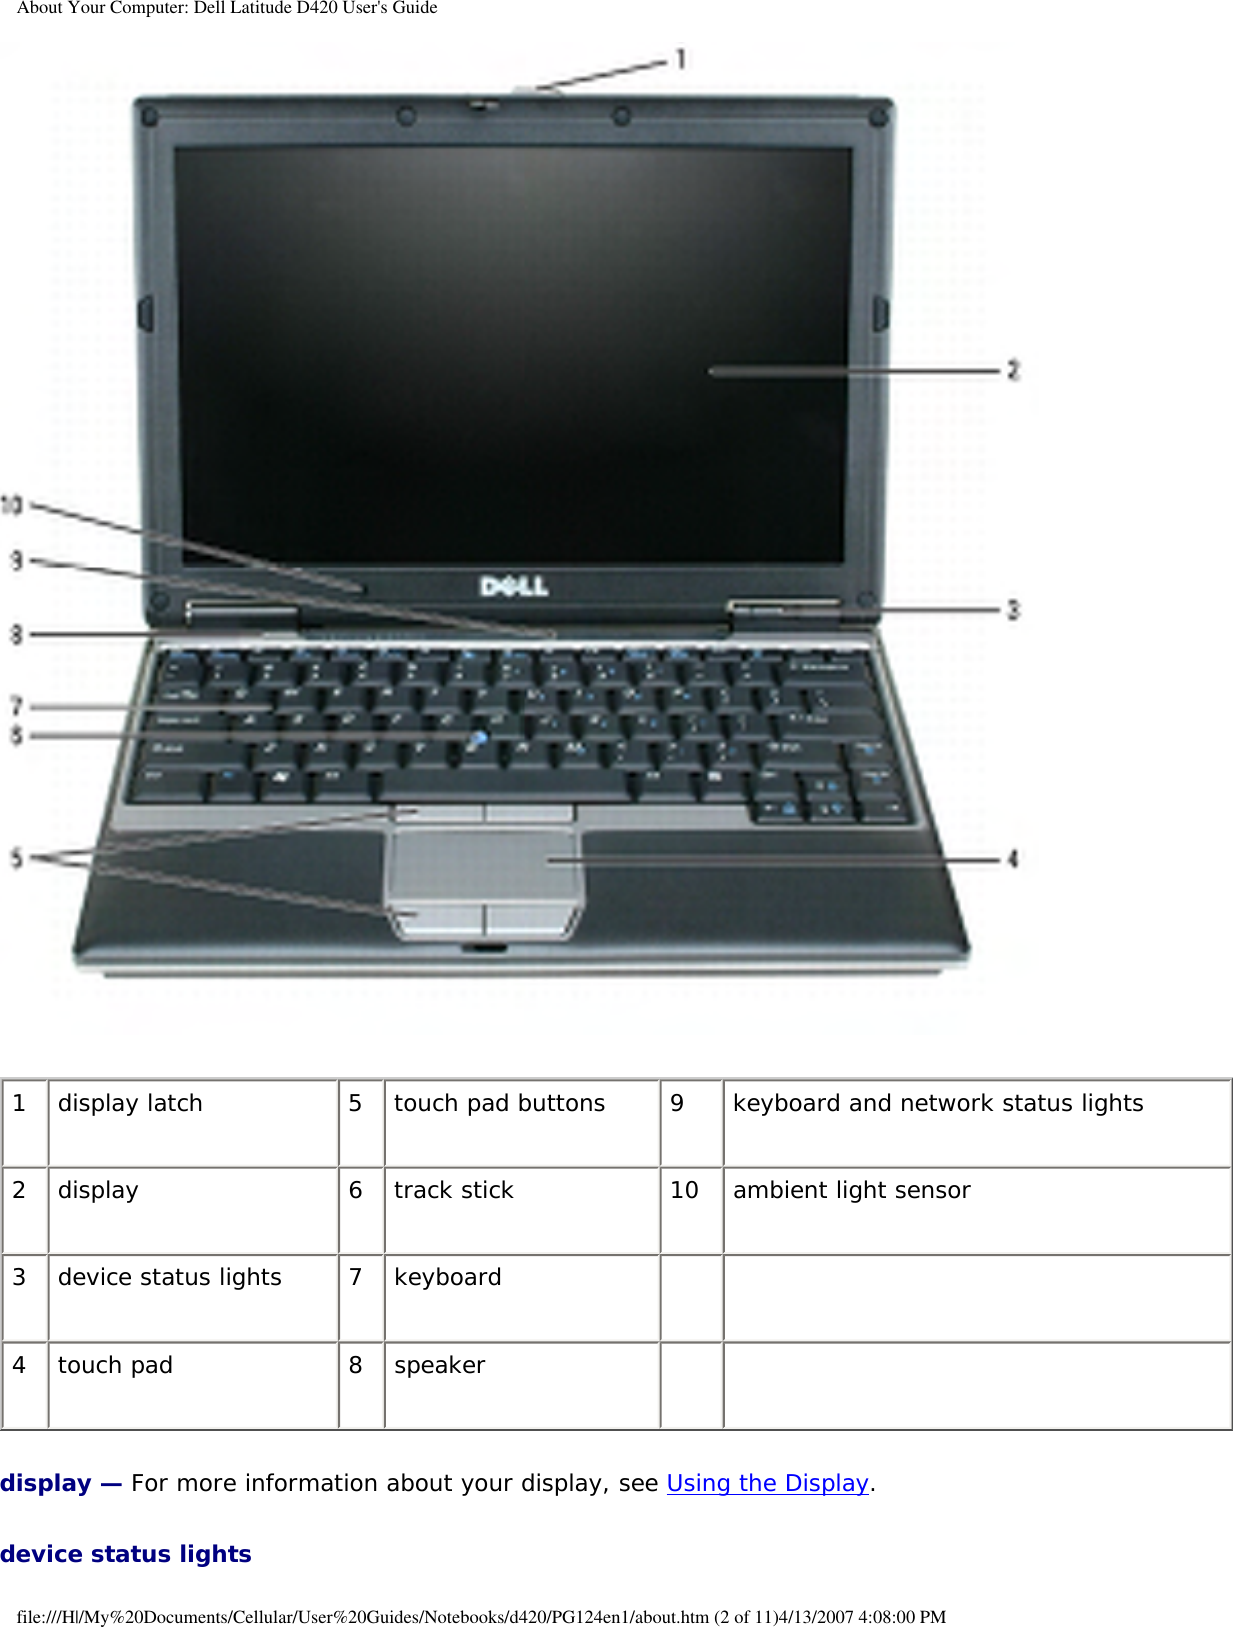 About Your Computer: Dell Latitude D420 User&apos;s Guide 1 display latch 5 touch pad buttons 9 keyboard and network status lights2 display 6 track stick 10 ambient light sensor3 device status lights 7 keyboard    4 touch pad 8 speaker    display — For more information about your display, see Using the Display.device status lights file:///H|/My%20Documents/Cellular/User%20Guides/Notebooks/d420/PG124en1/about.htm (2 of 11)4/13/2007 4:08:00 PM